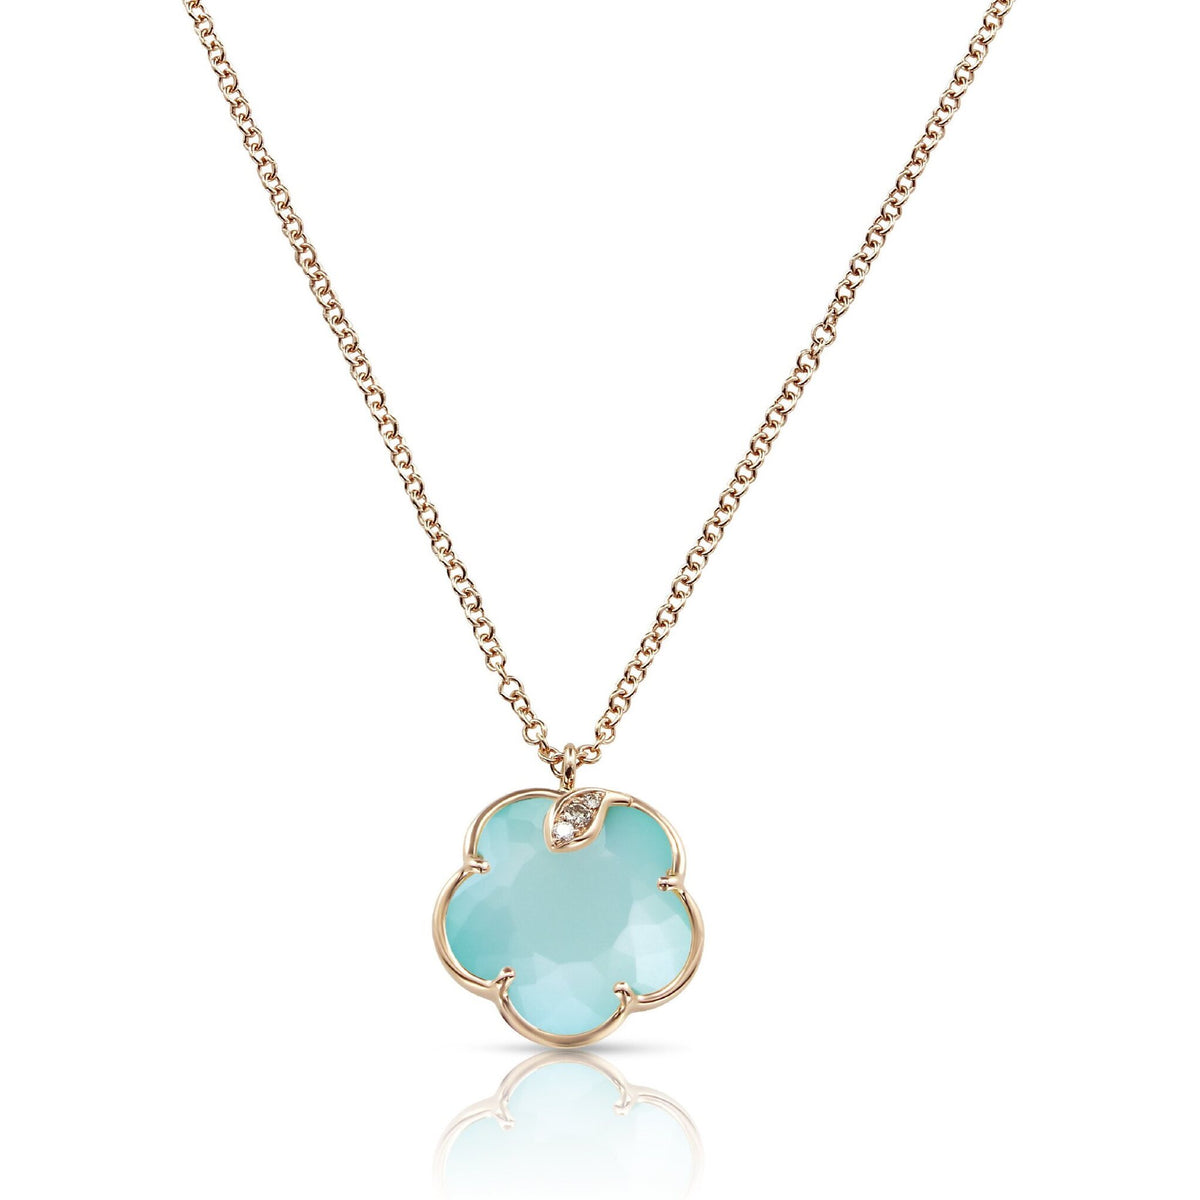 Pasquale Bruni - Petit Joli Necklace in 18k Rose Gold with Turquoise and White Moonstone Doublet, White and Champagne Diamonds